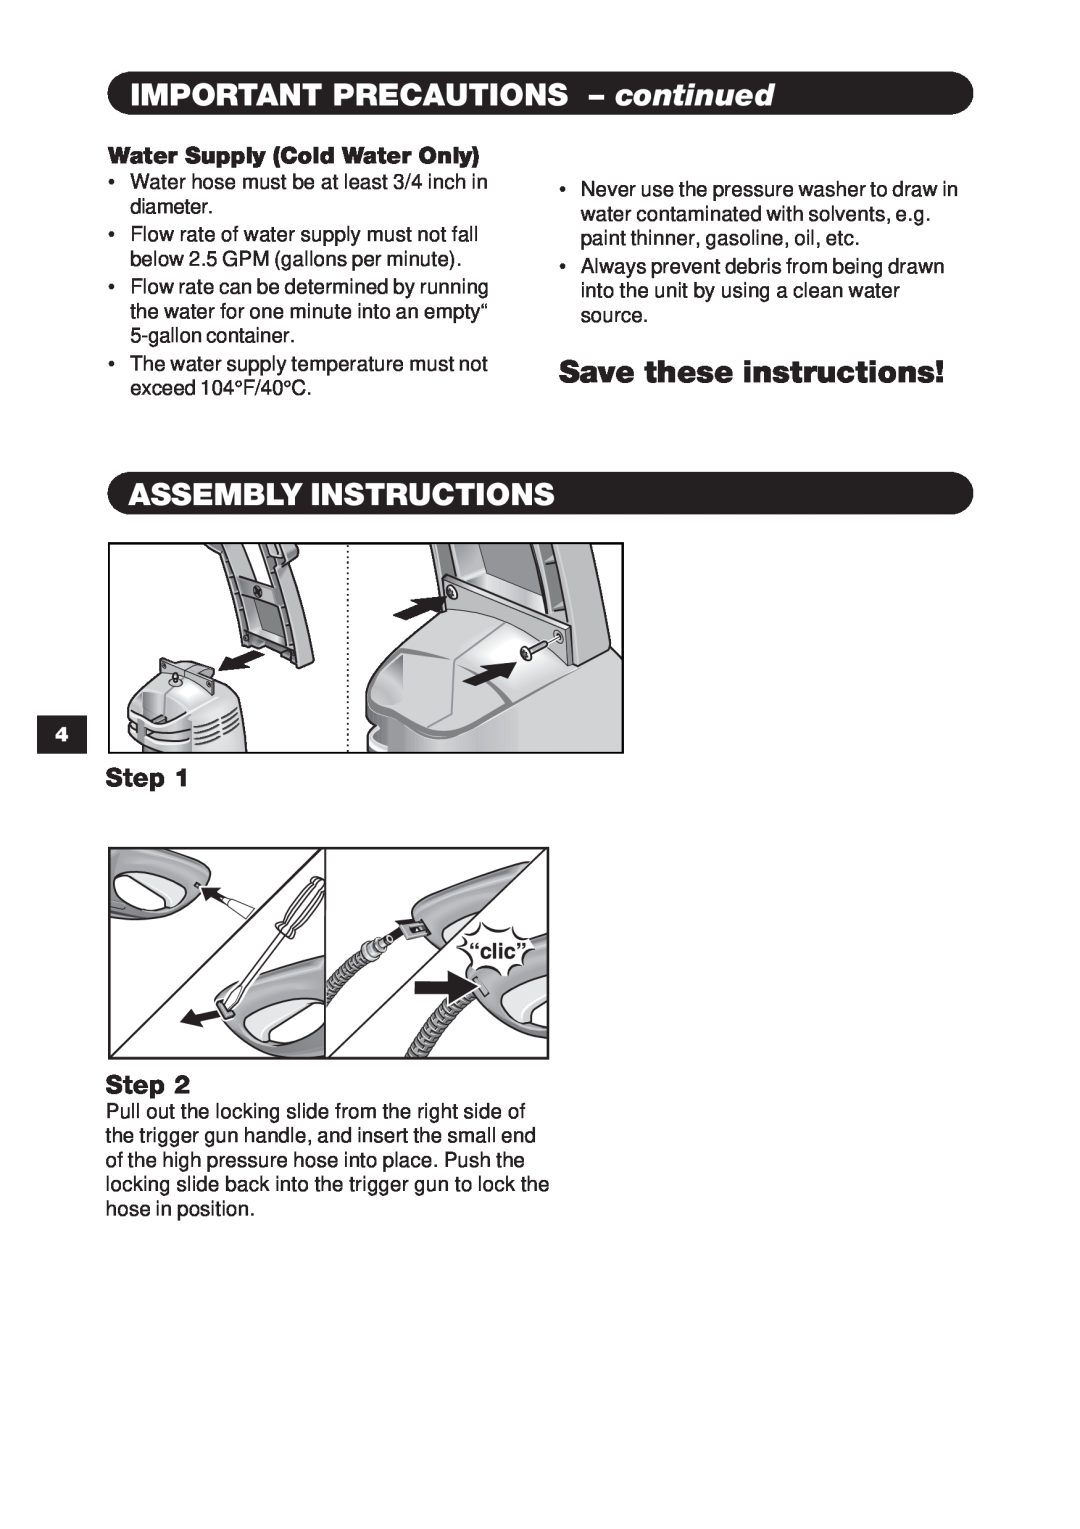 Karcher K 3.78 specifications IMPORTANT PRECAUTIONS – continued, Save these instructions, Assembly Instructions, Step Step 